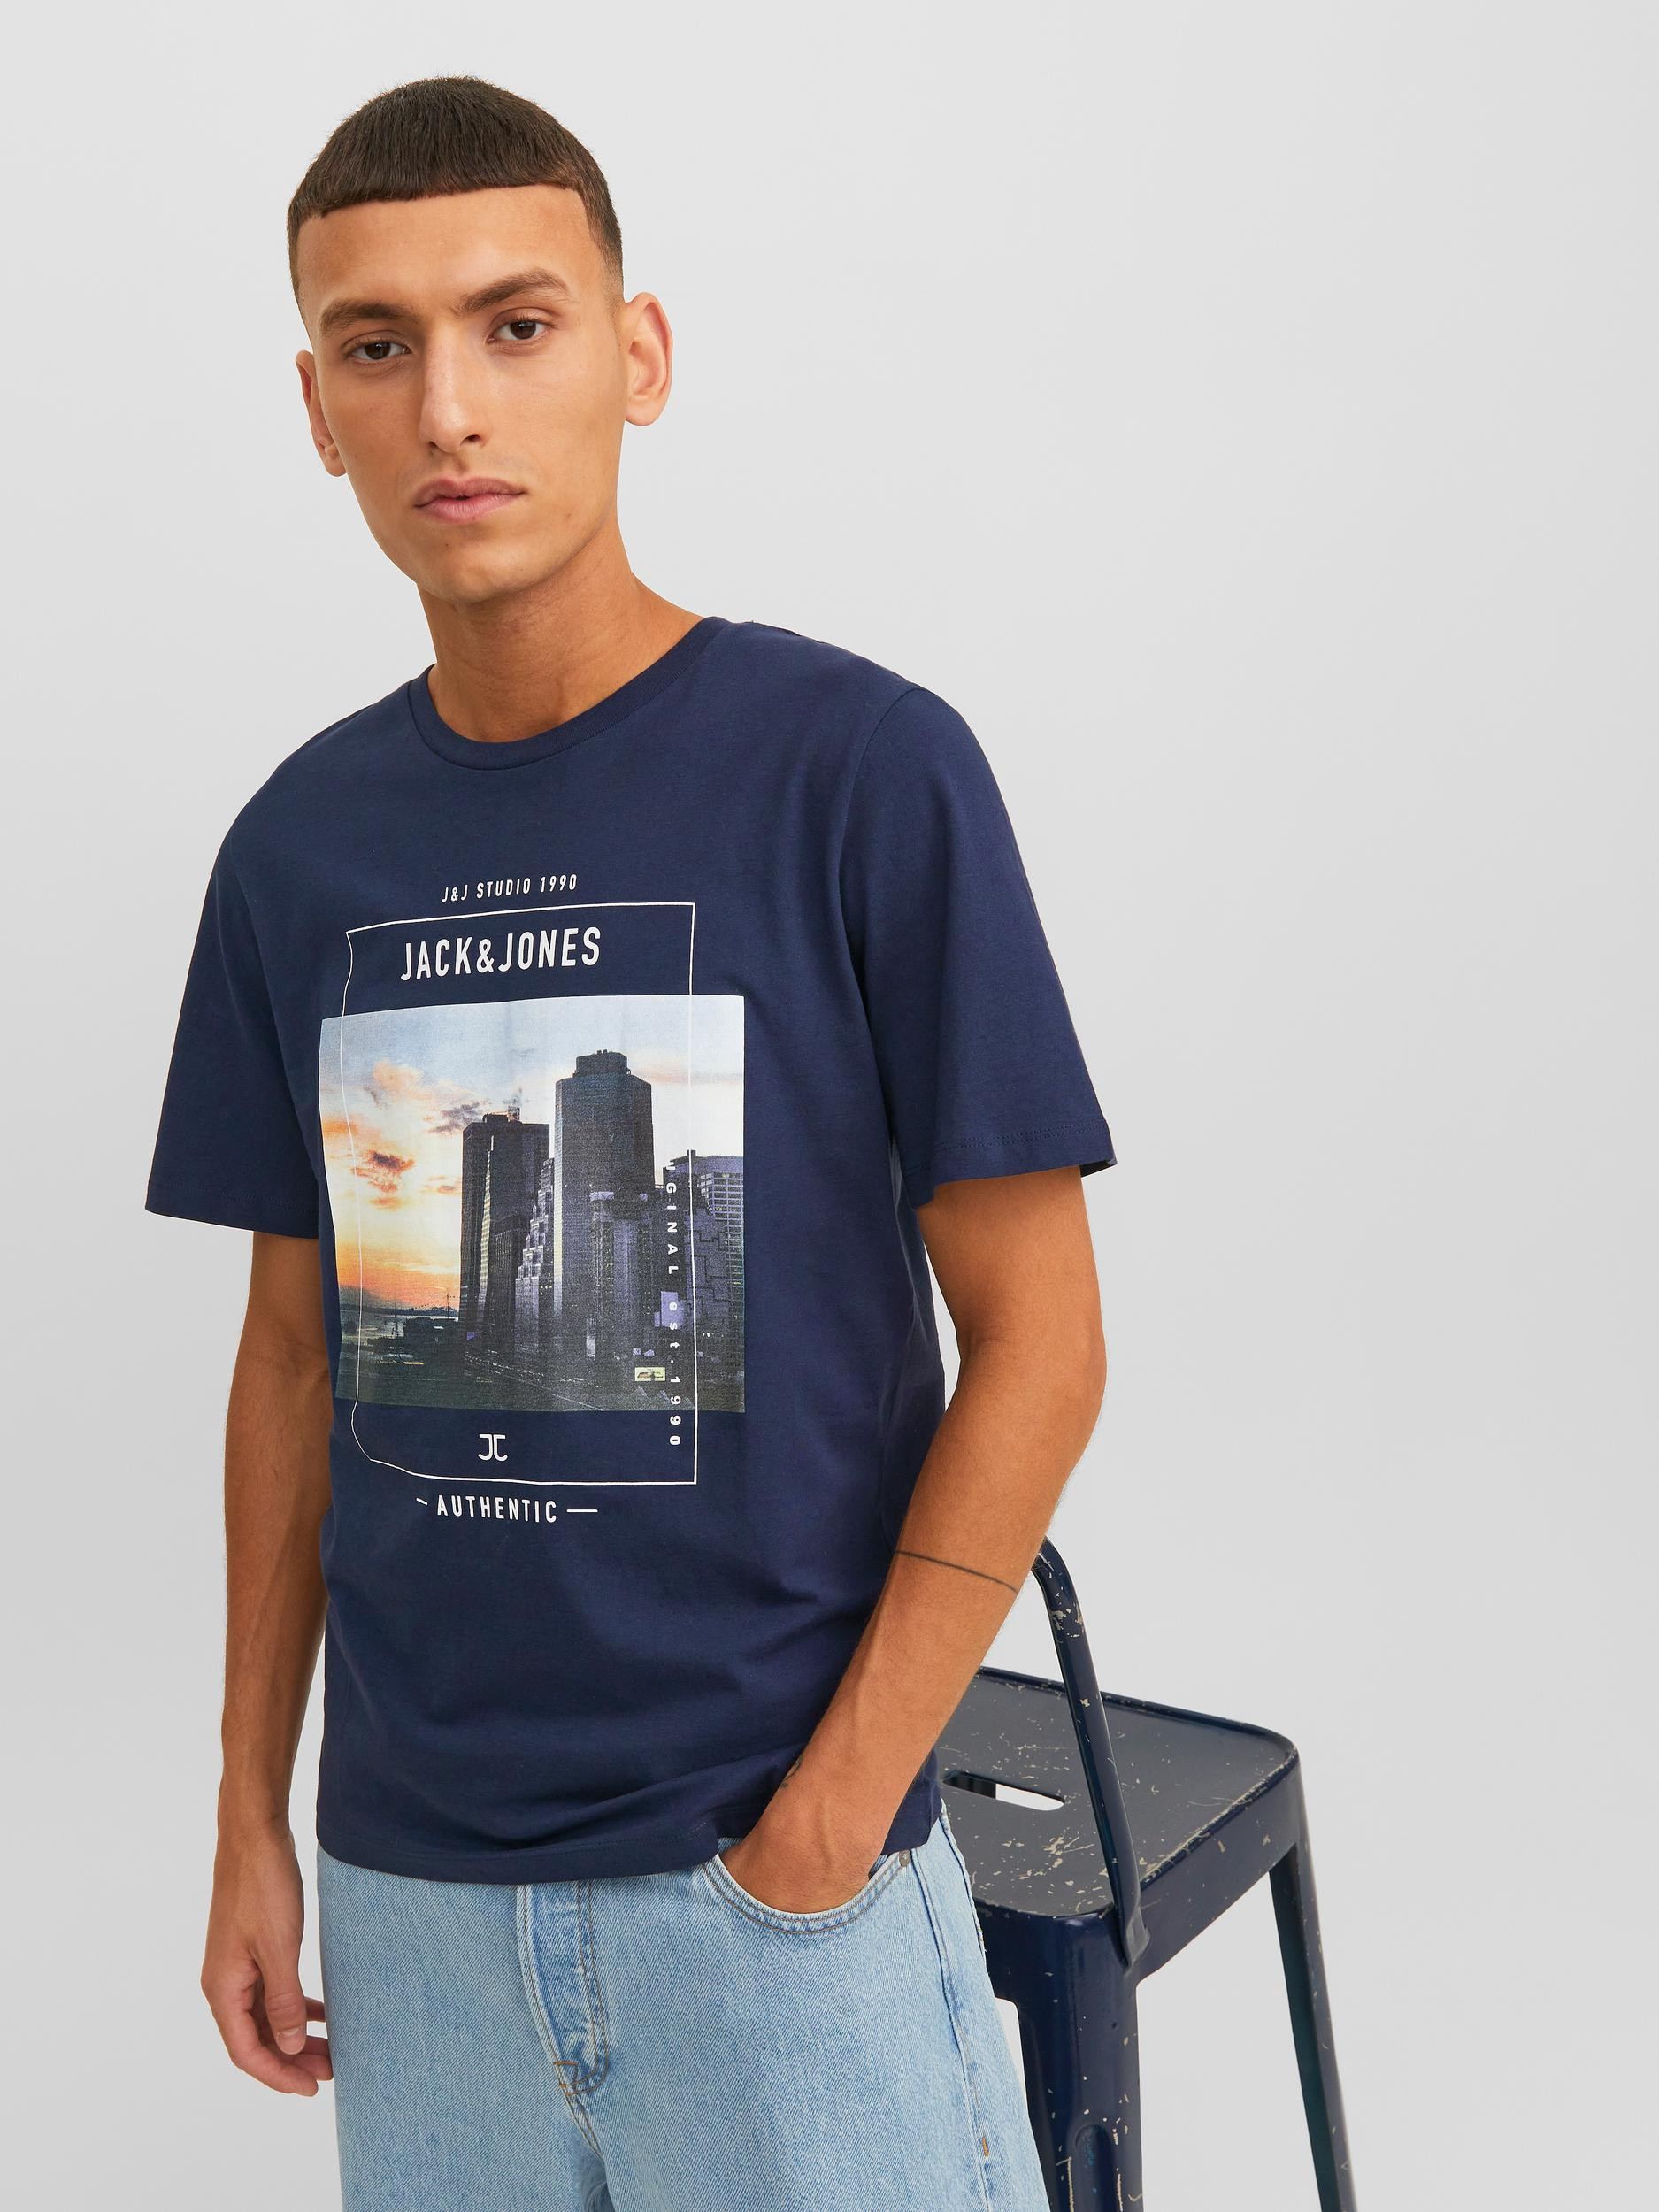 Jack & Jones -T-shirt in cotone con stampa, Blu scuro, large image number 4